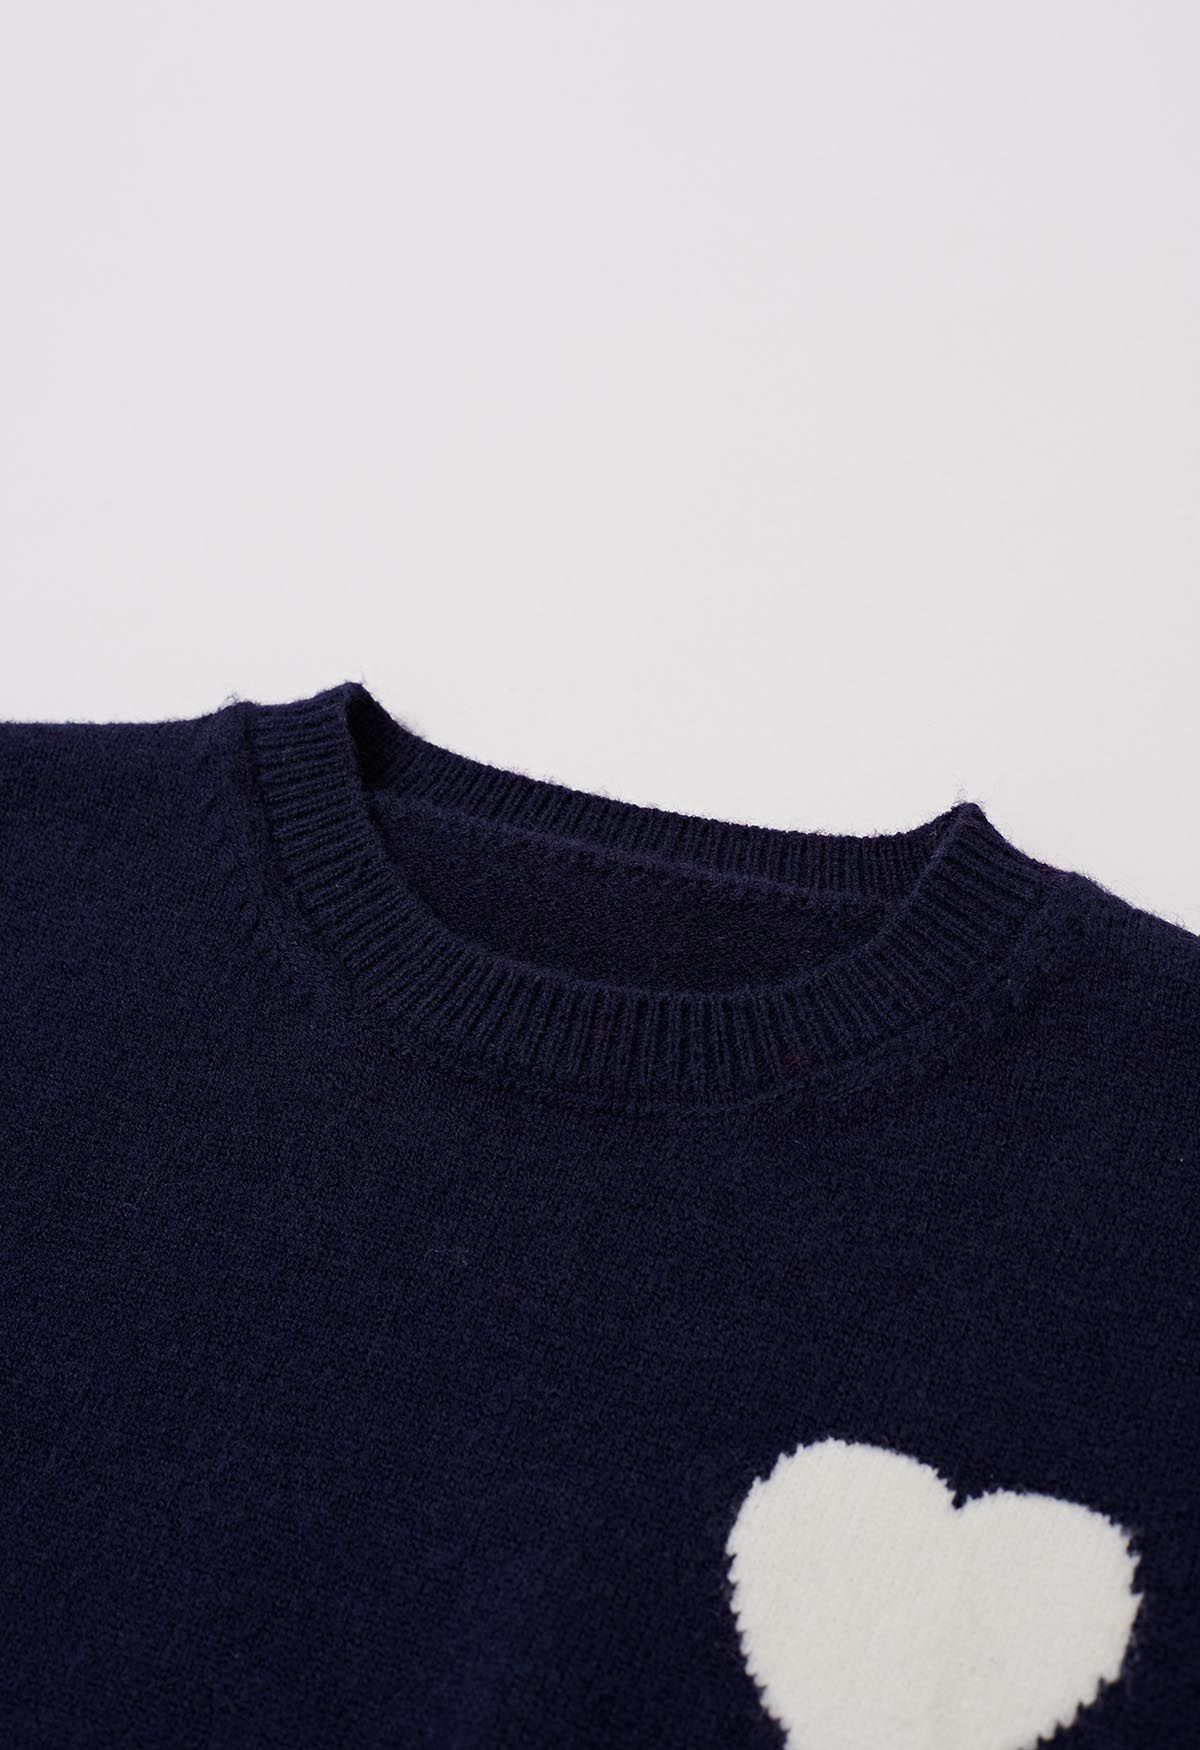 Sweet Heart Cozy Knit Sweater in Navy - Retro, Indie and Unique Fashion